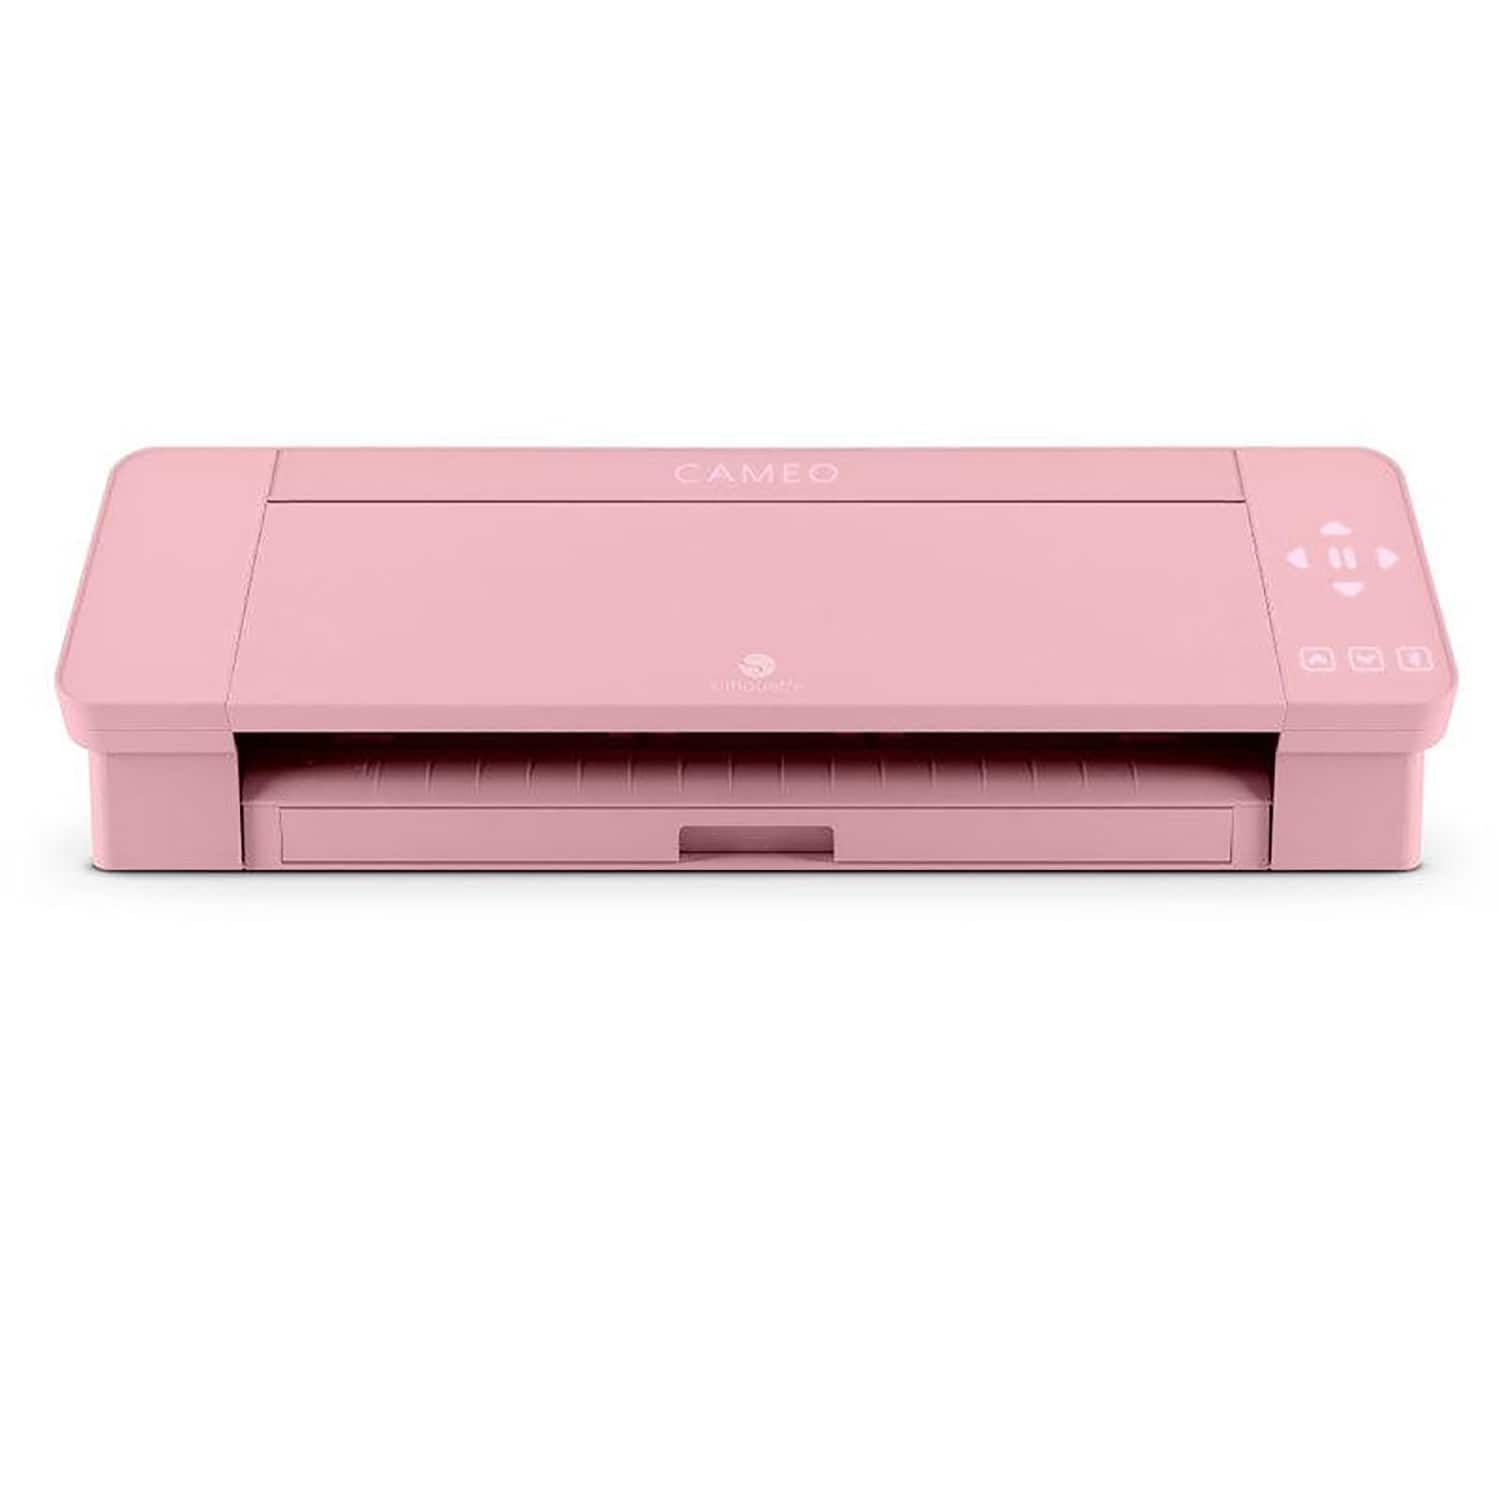 Buy the Silhouette CAMEO® 4 Cutting Machine at Michaels